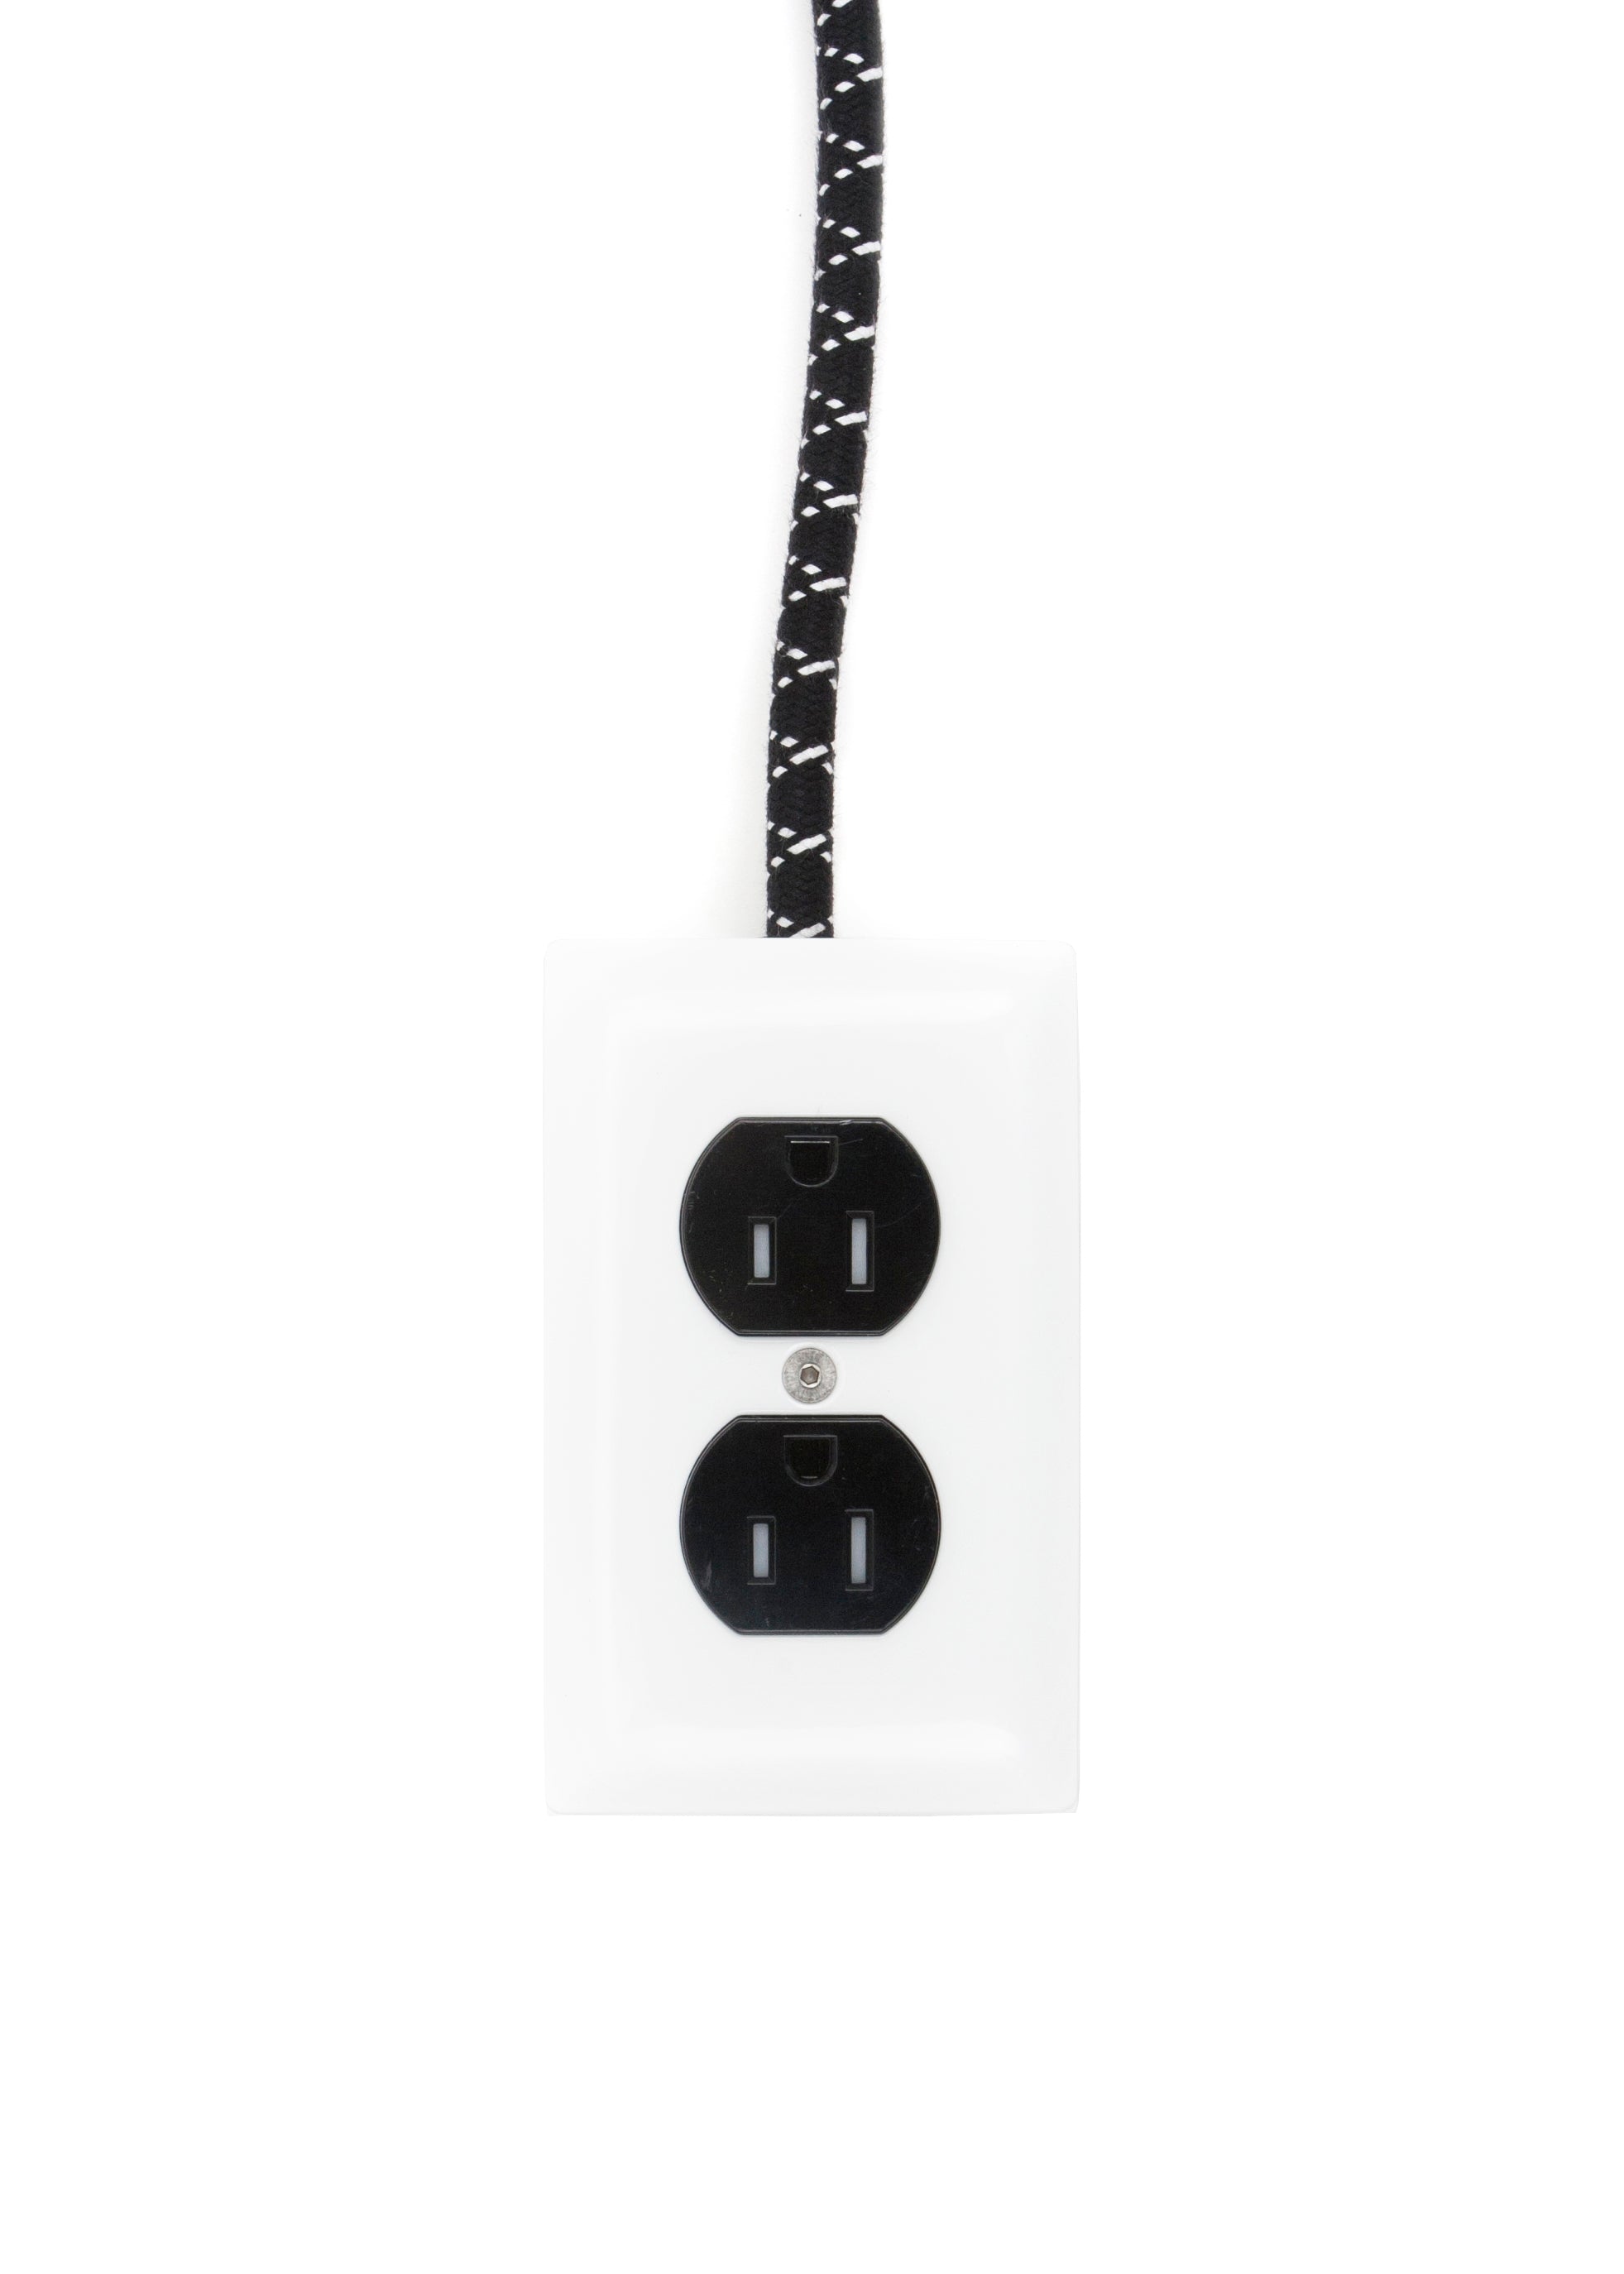 Extō AC/DC Black & White - A Modern Dual-Tamper-Resistant Outlet, 15-AMP Extension Cord